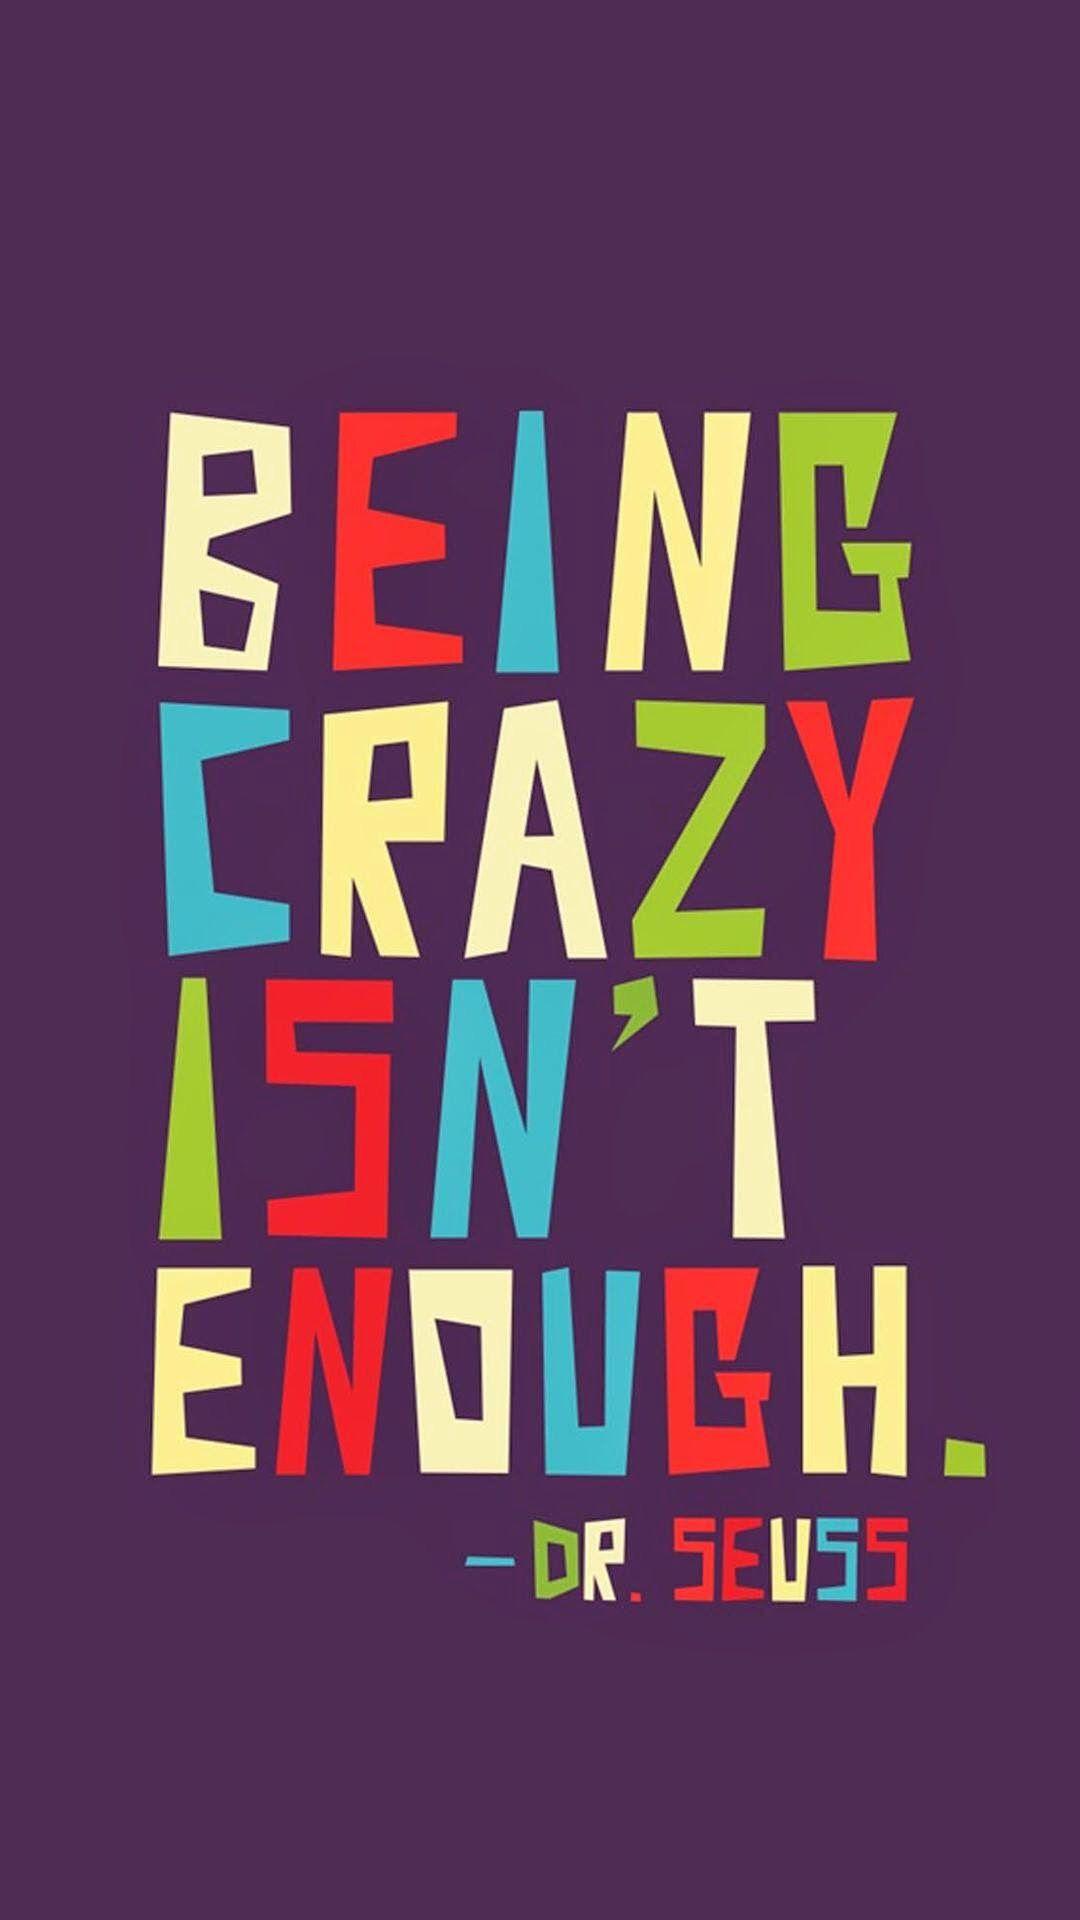 Tap image for more quote wallpaper! Being Crazy - iPhone